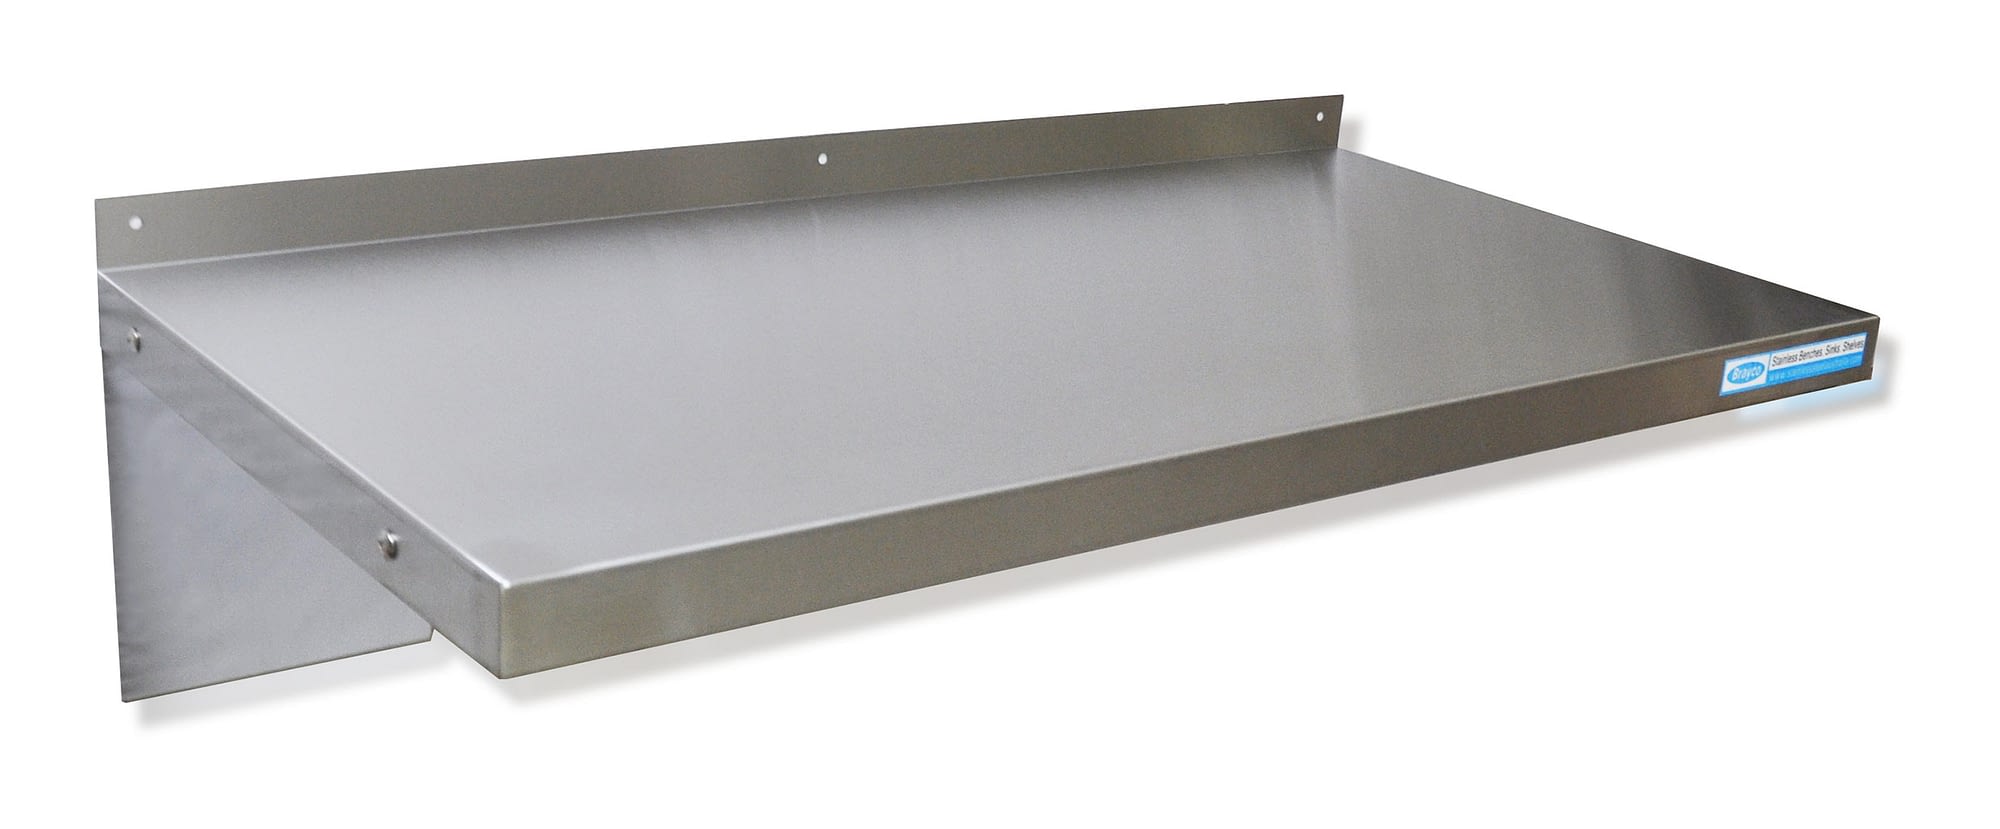 Stainless Steel Solid Wall Shelf, 900 X 450mm deep